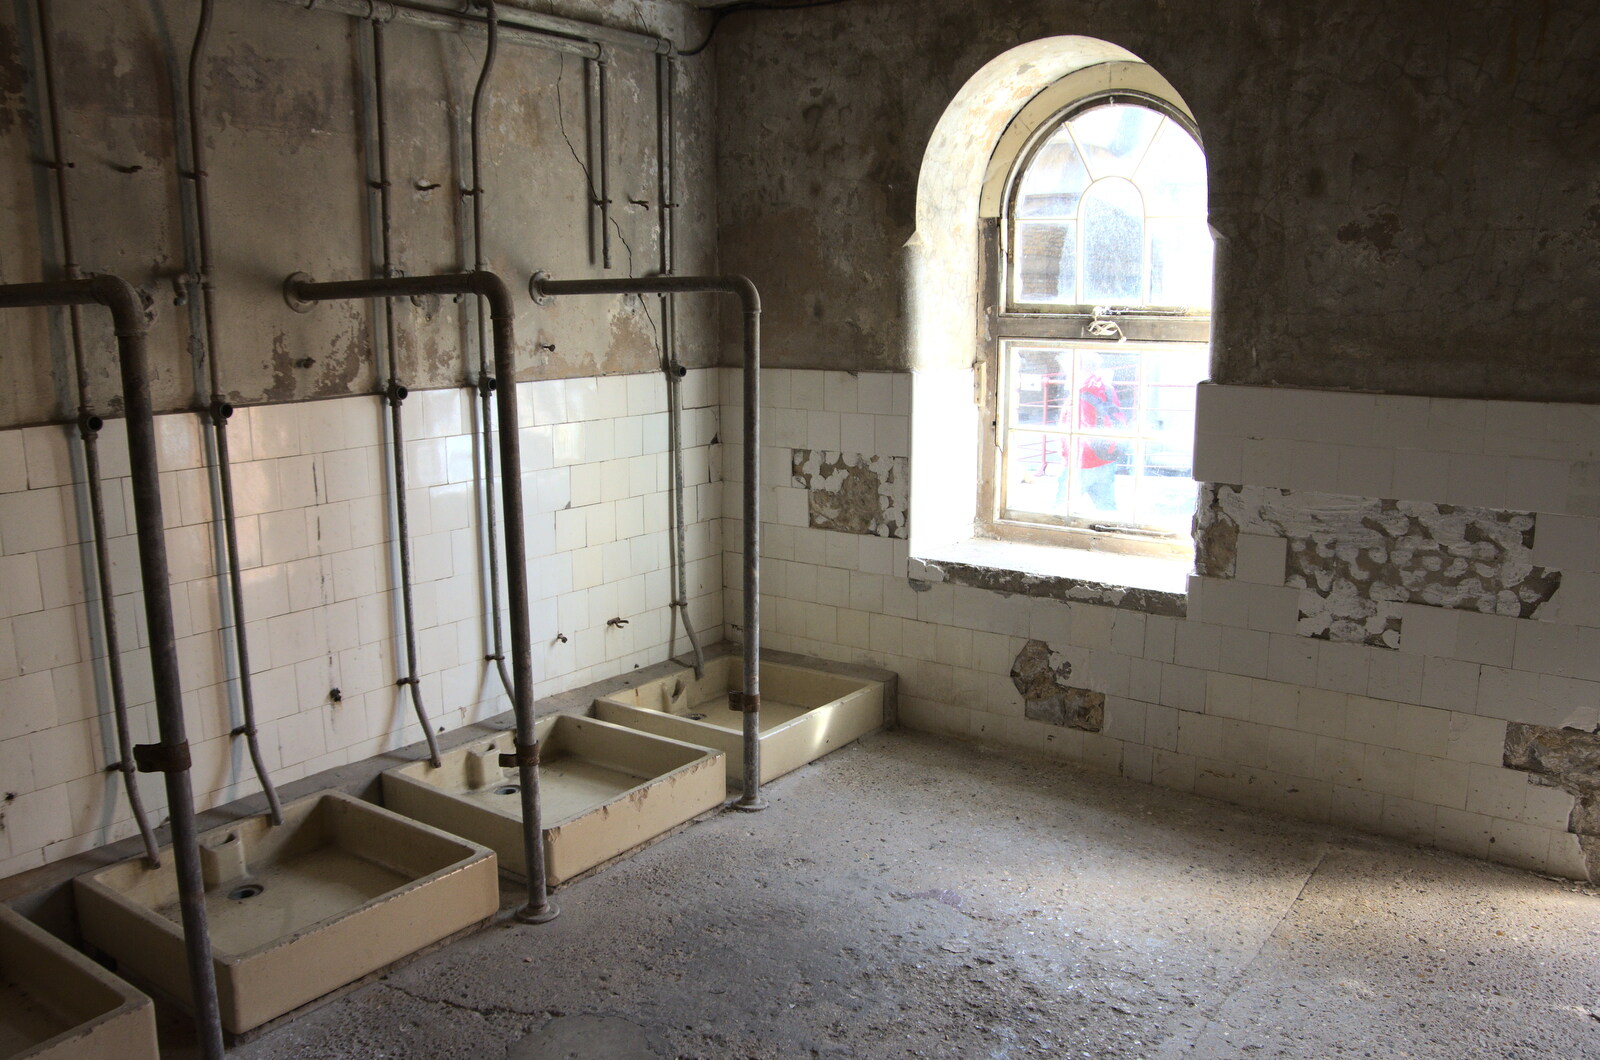 An old WWII shower block from A Trip to Landguard Fort, Felixstowe, Suffolk - 16th October 2022